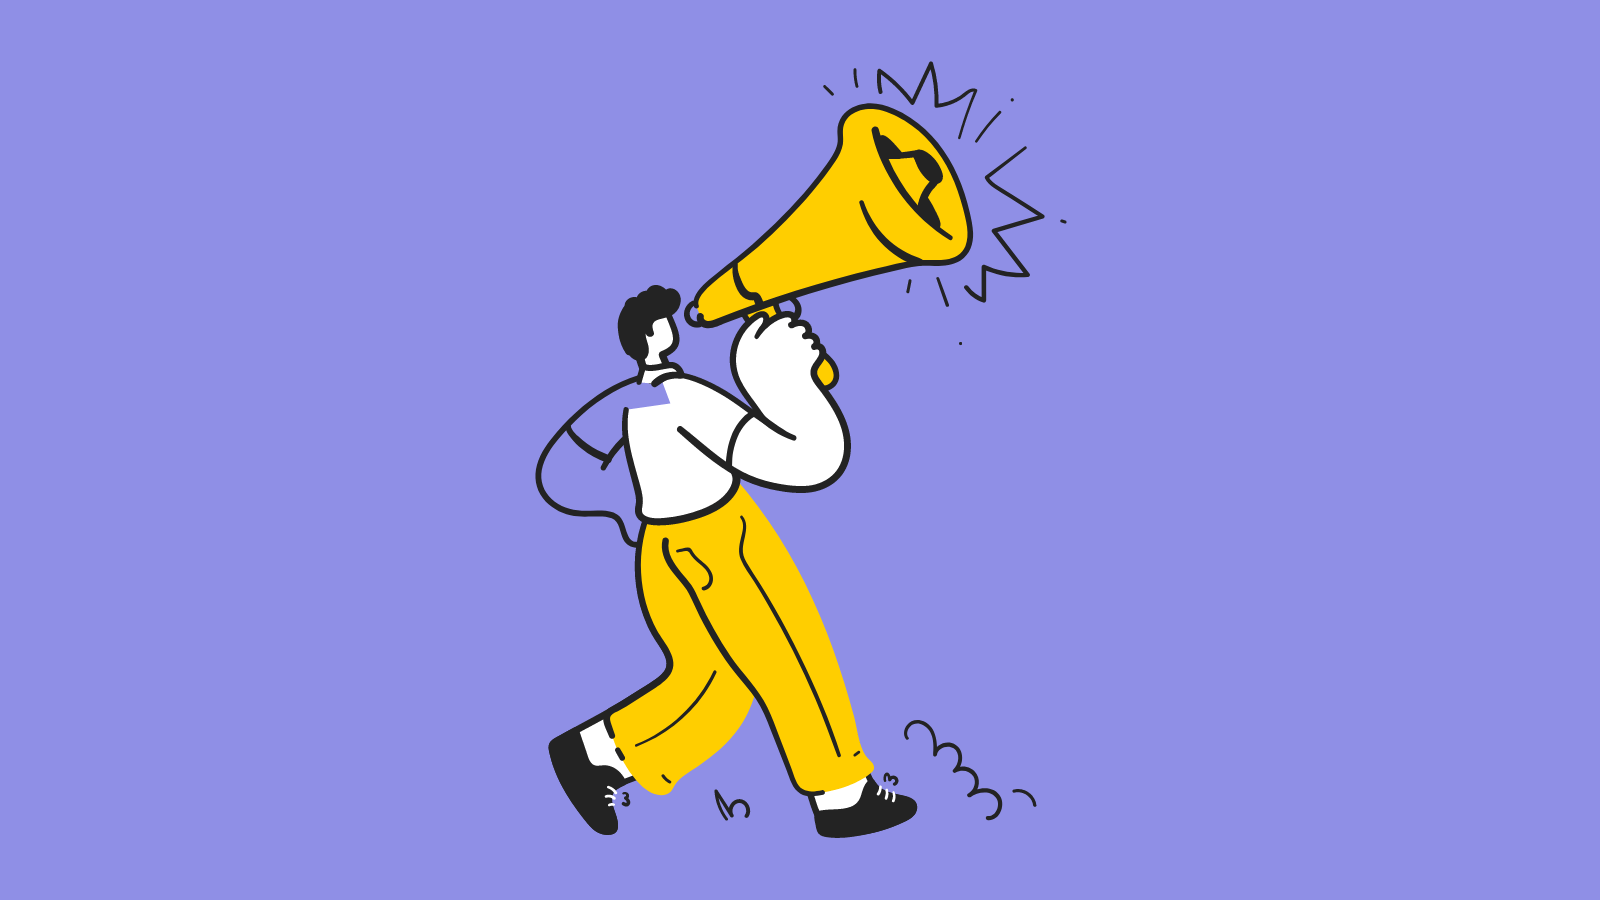 A person holding a giant megaphone